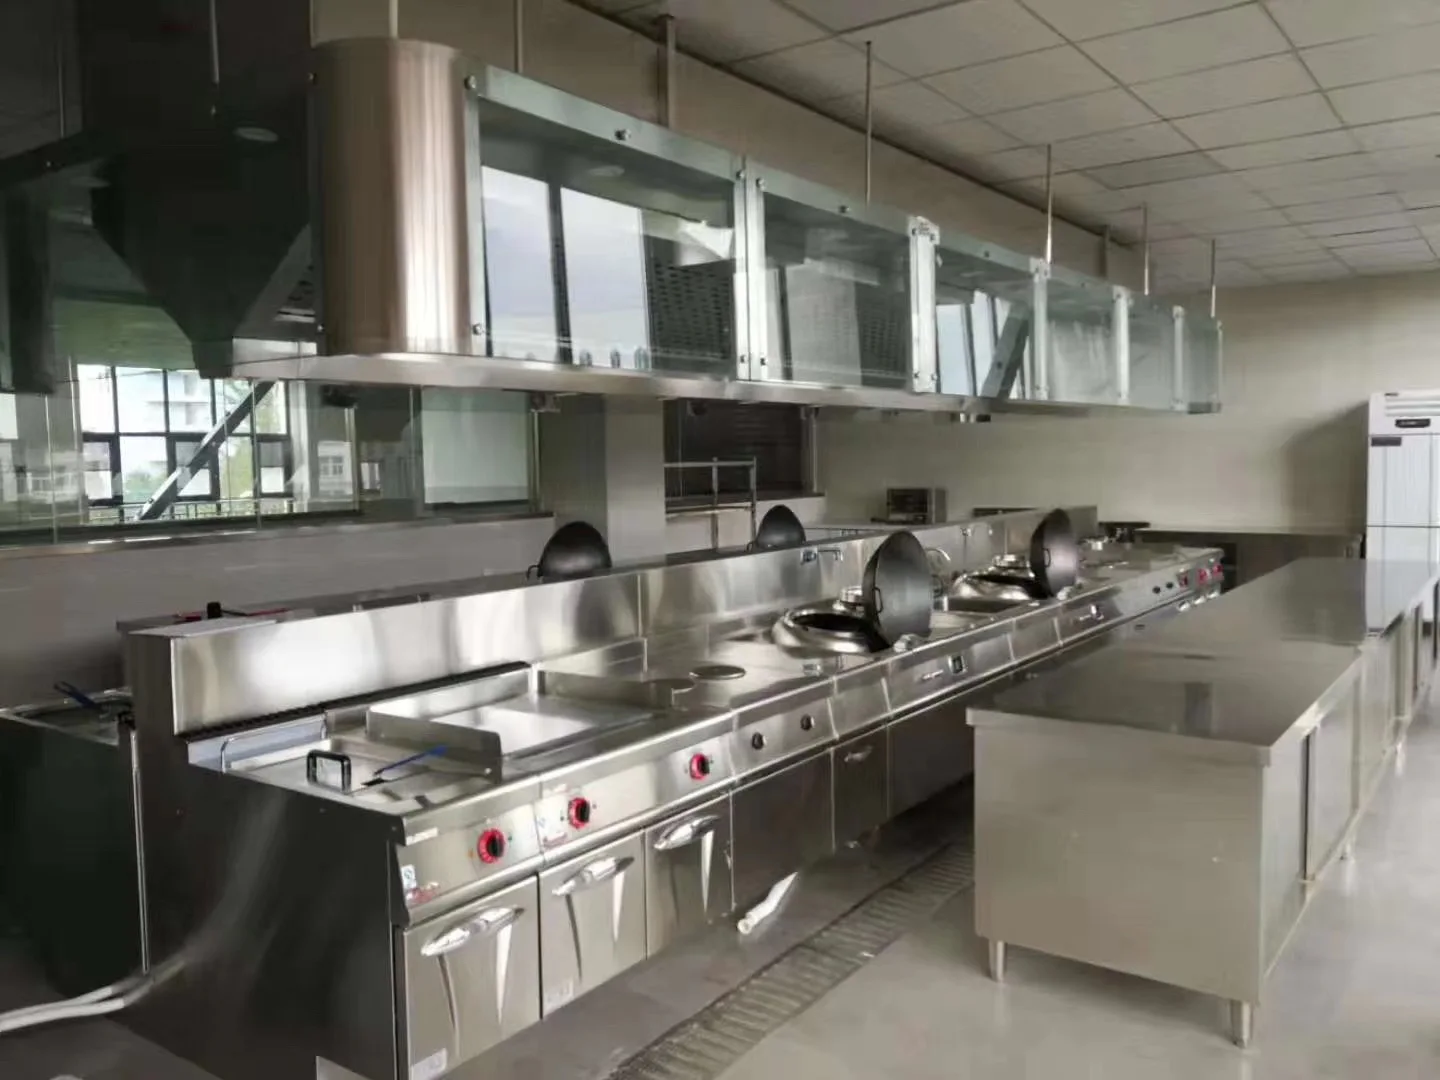 CE Commercial catering other hotel fast snack food machiner cocina industrial & Restaurant Equipment supplies kitchen equipments